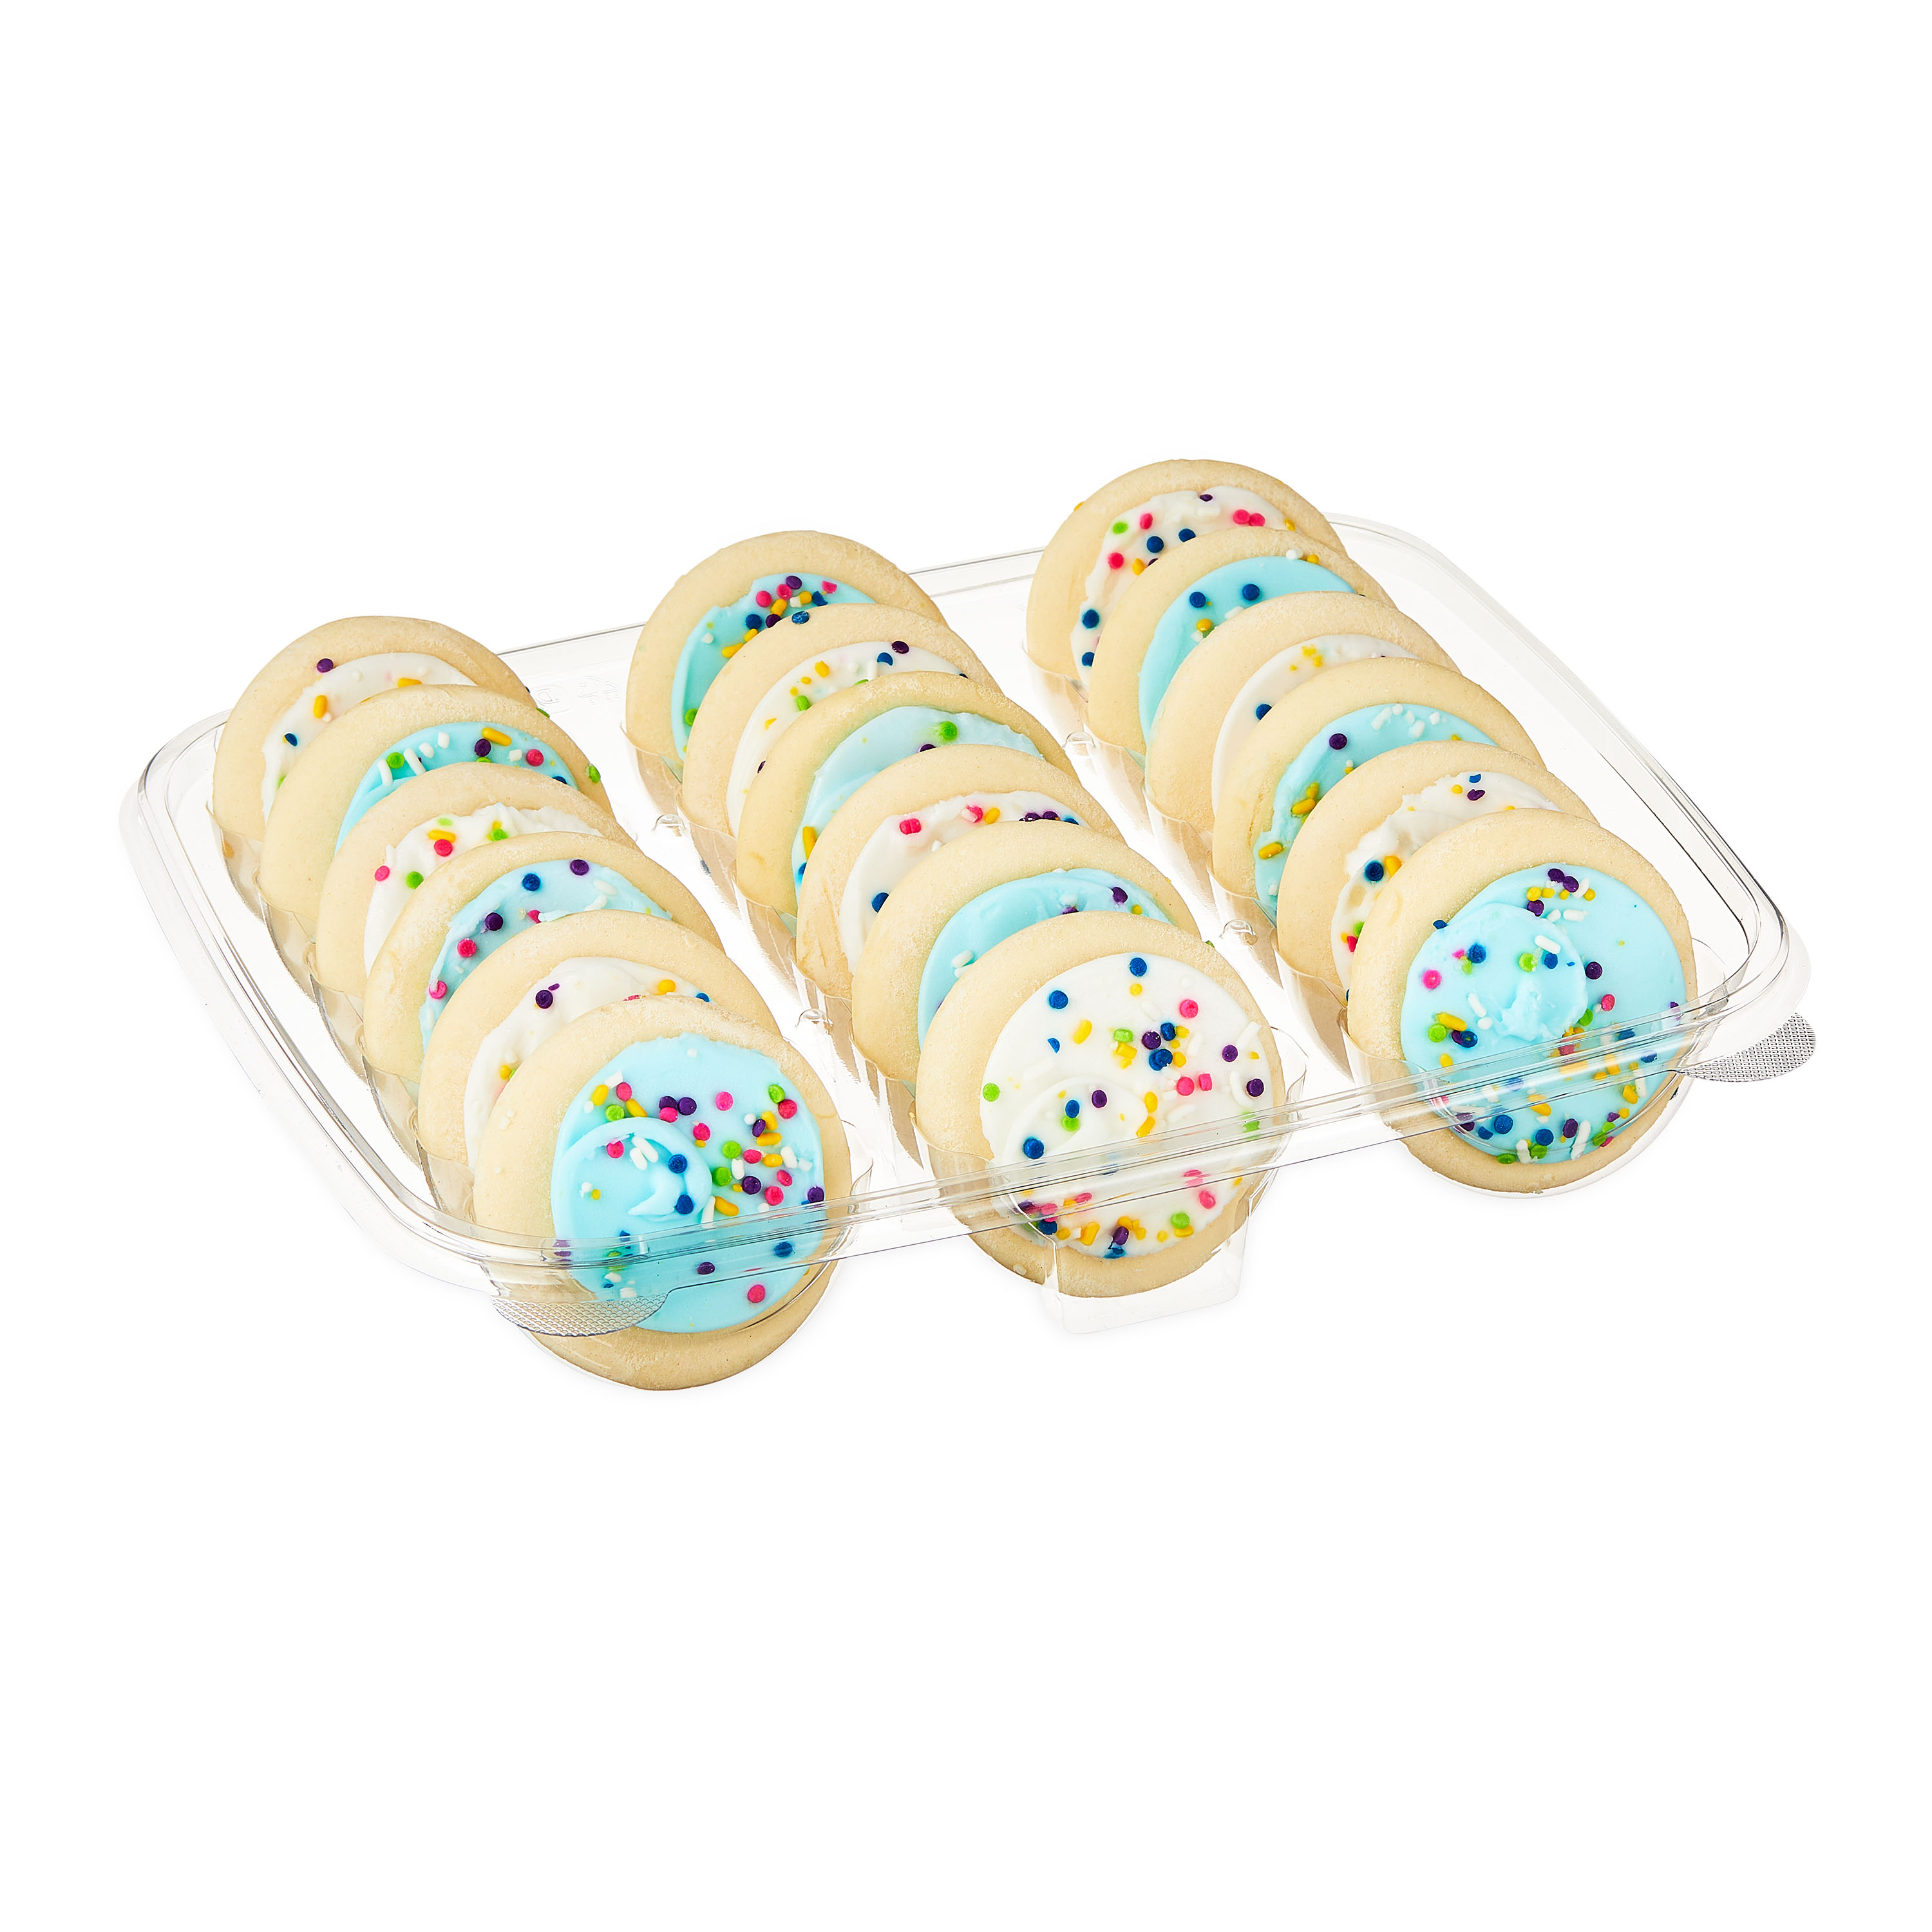 Freshness Guaranteed Frosted Sugar Cookies 24.3 oz, 18 Count - image 1 of 9